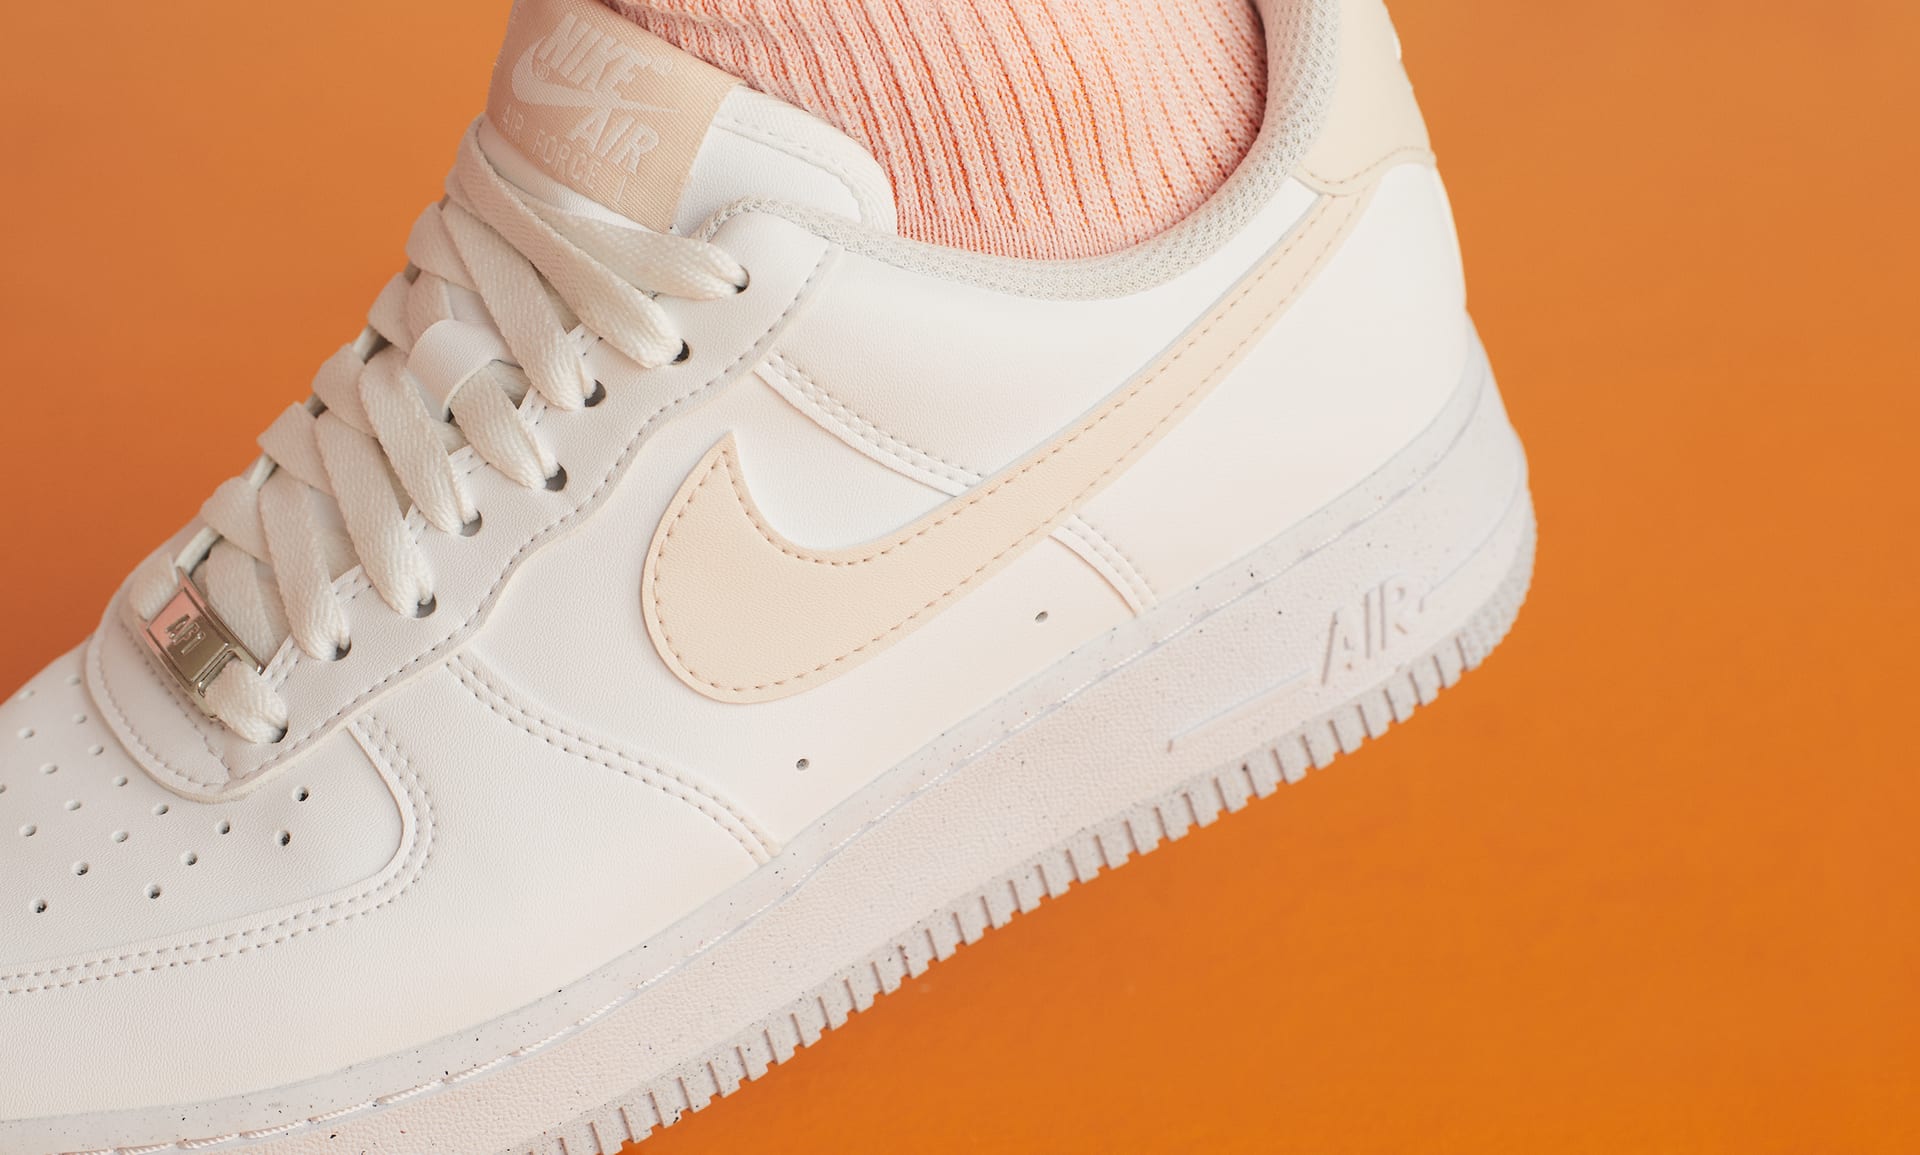 Nike Air Force 1 '07 Next Nature Women's Shoes. Nike GB